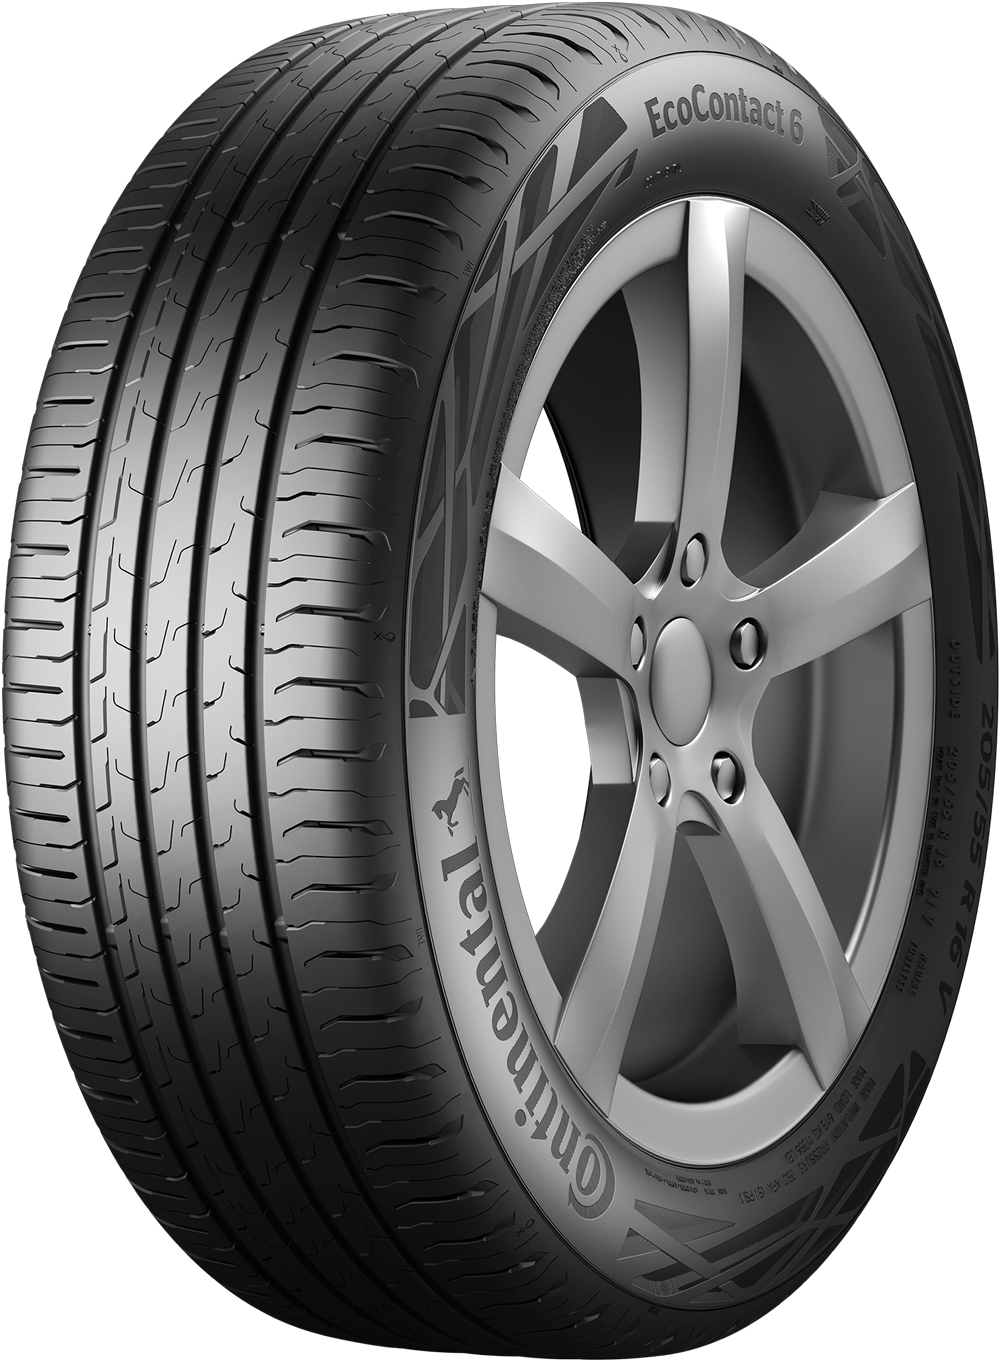 Anvelope auto CONTINENTAL ECO6MO MERCEDES 225/45 R18 91W